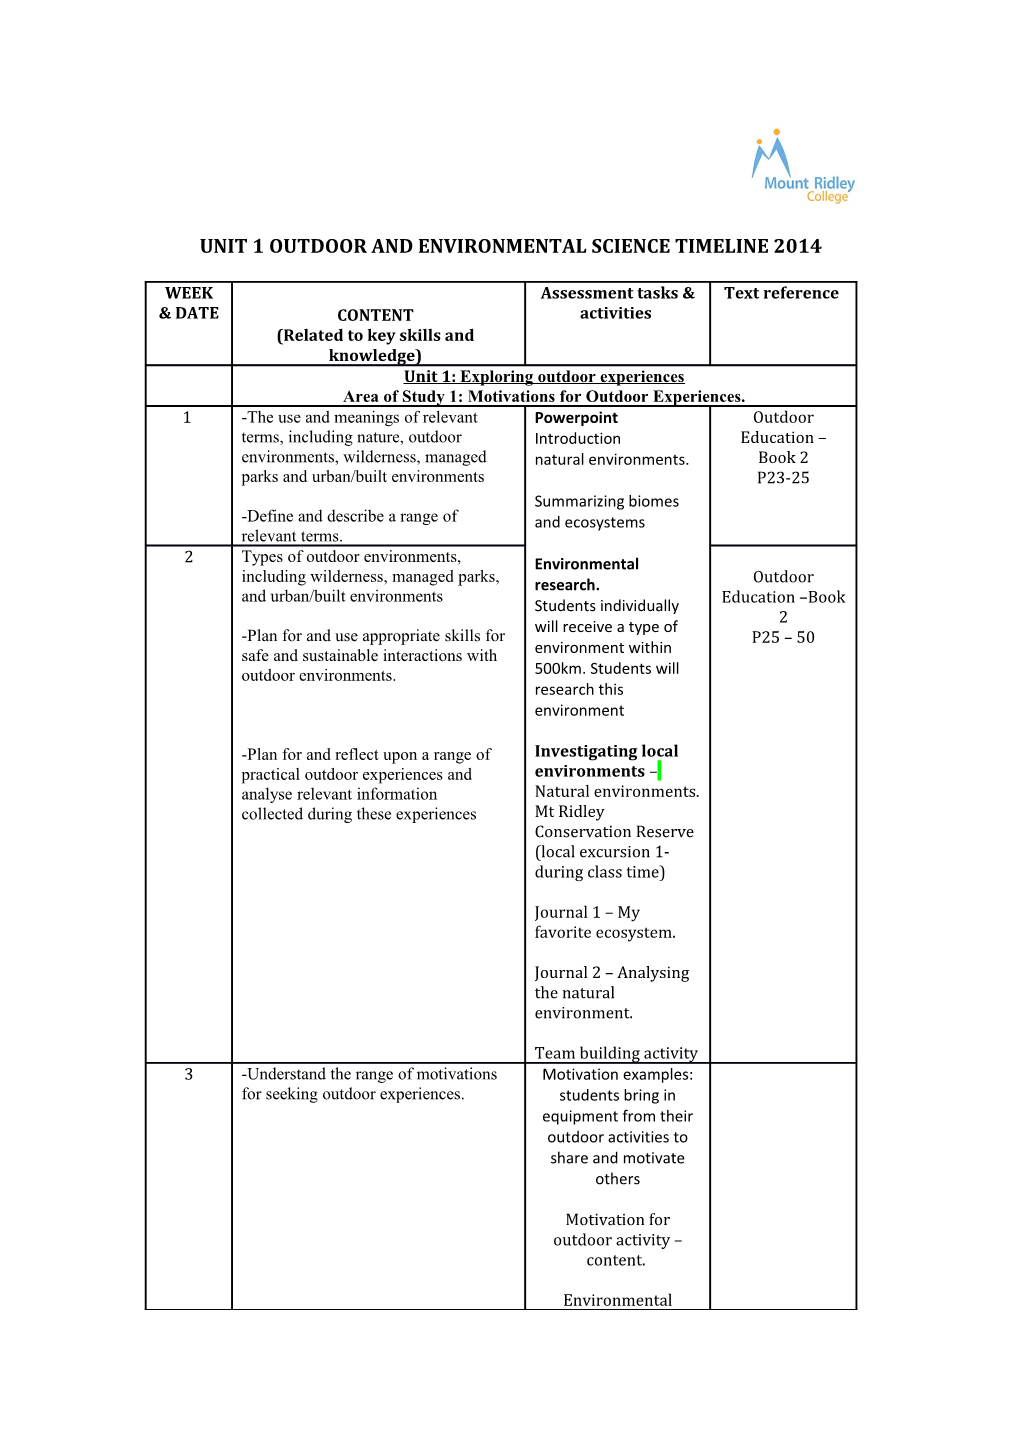 Unit 1 Outdoor and Environmental Science Timeline 2014